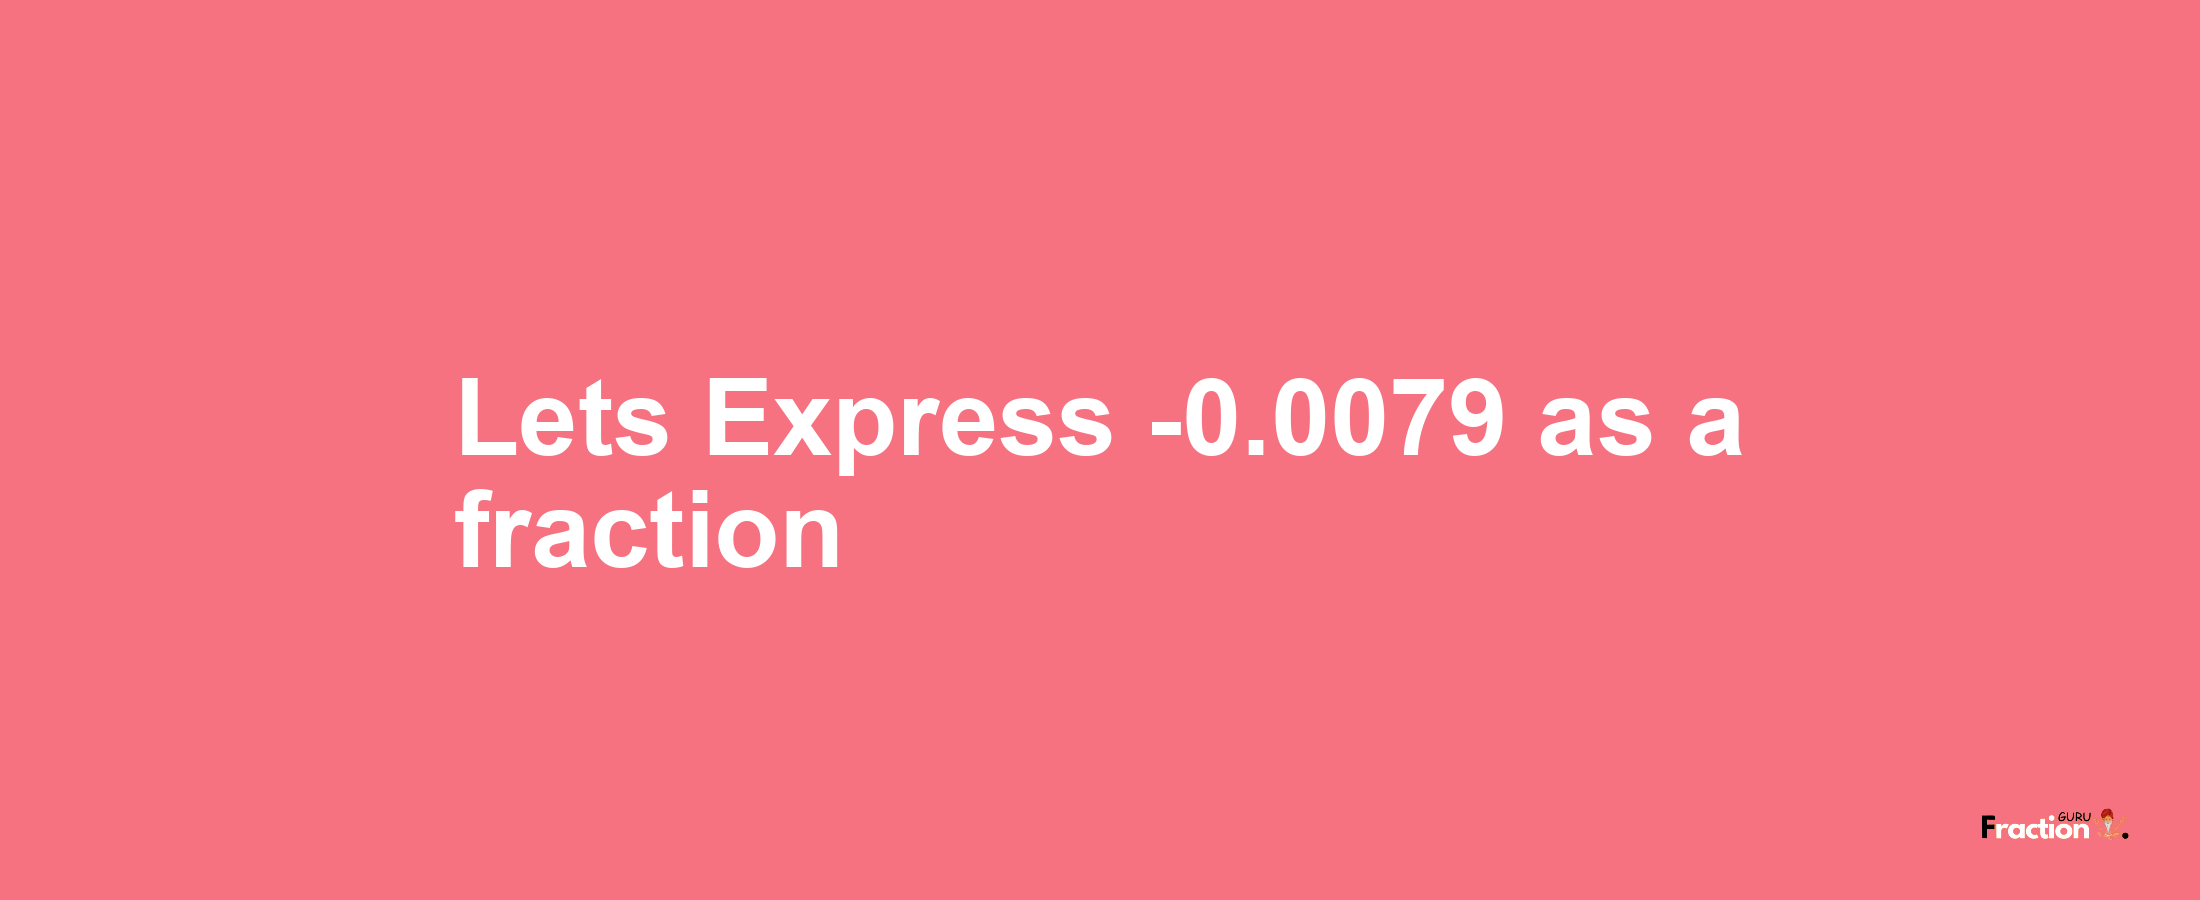 Lets Express -0.0079 as afraction